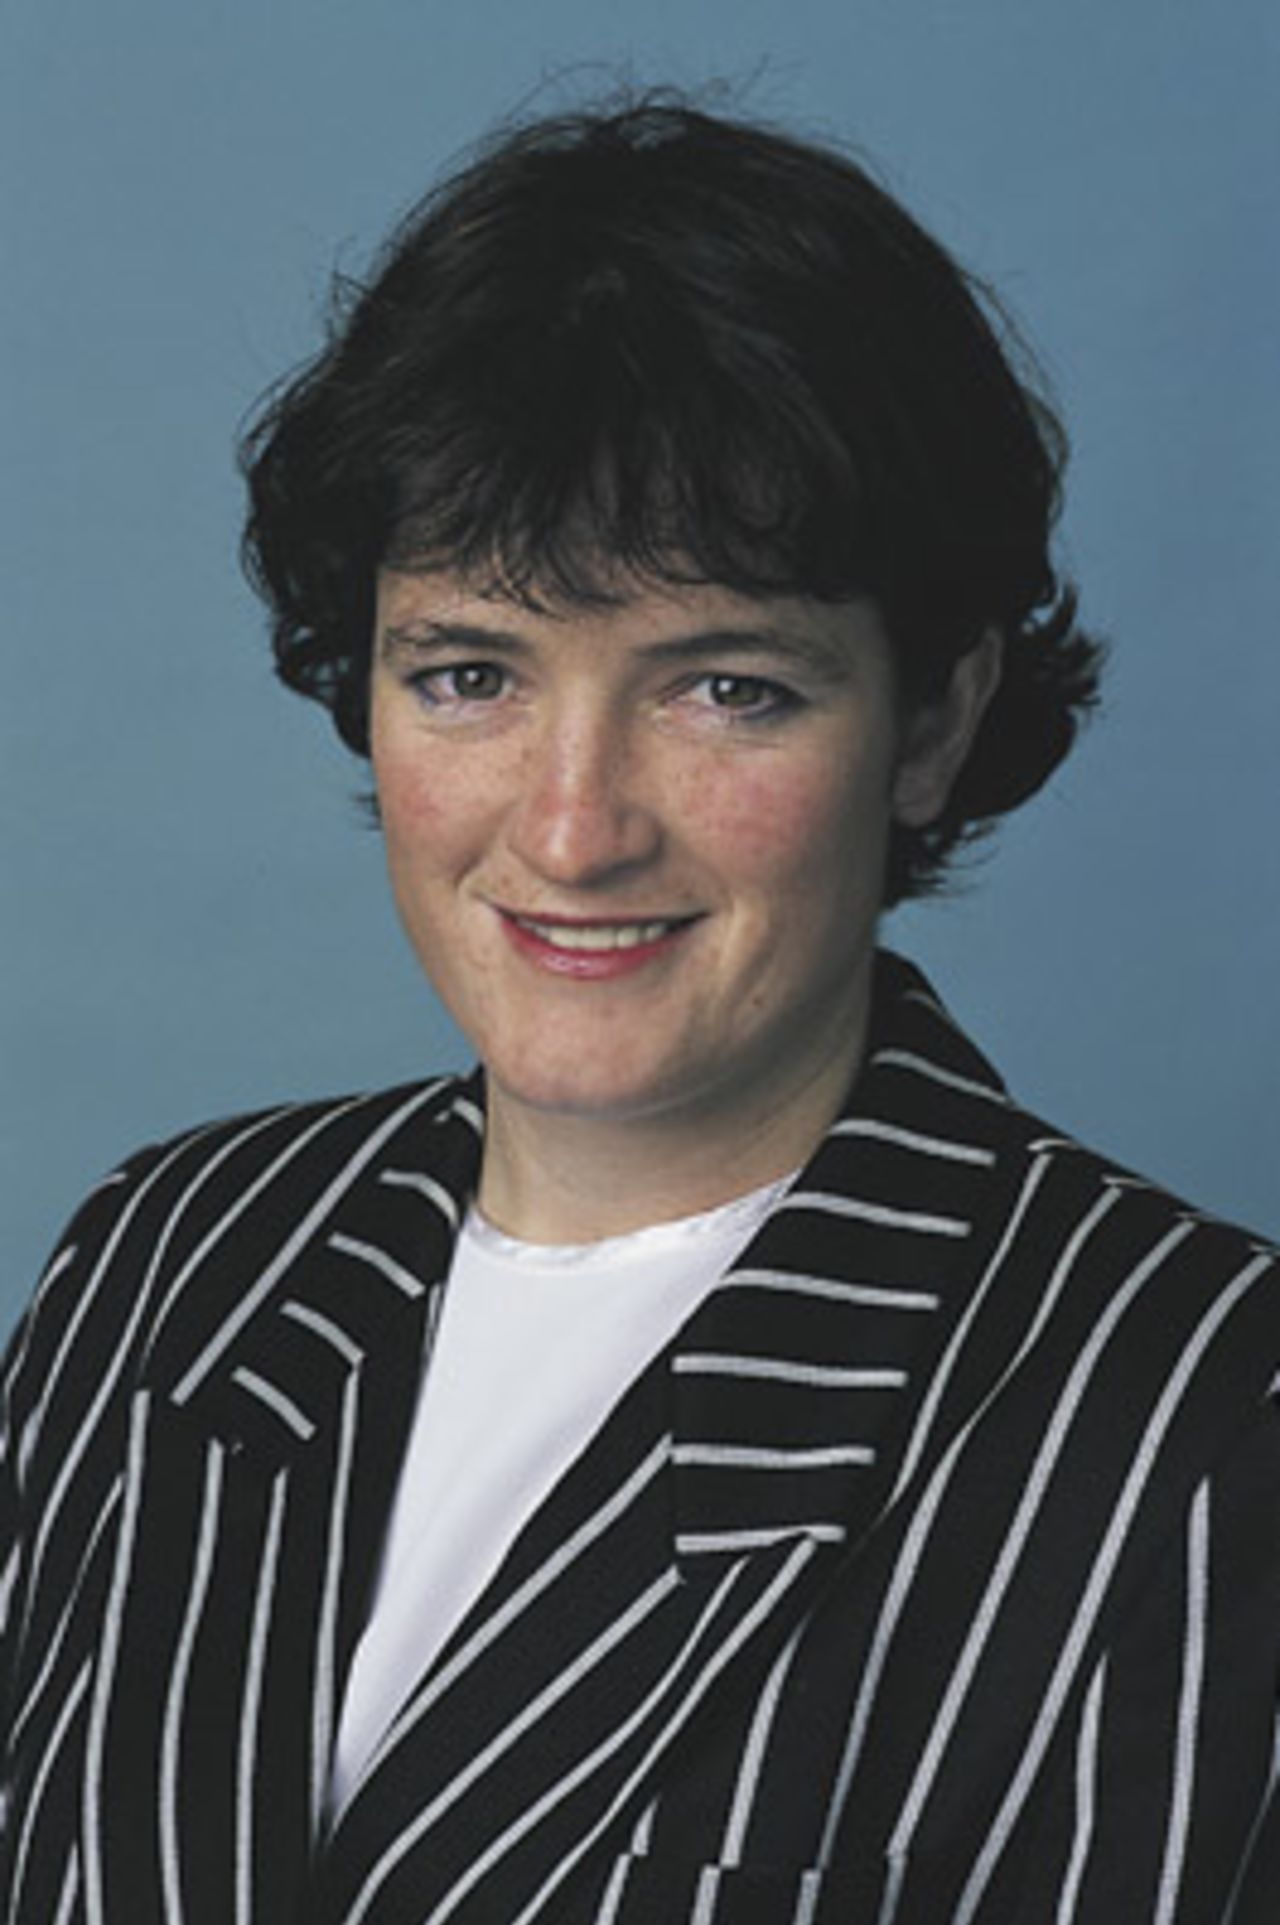 Portrait of Paula Flannery, at Lincoln, July 2000 - New Zealand training squad member for the CricInfo Women's World Cup 2000